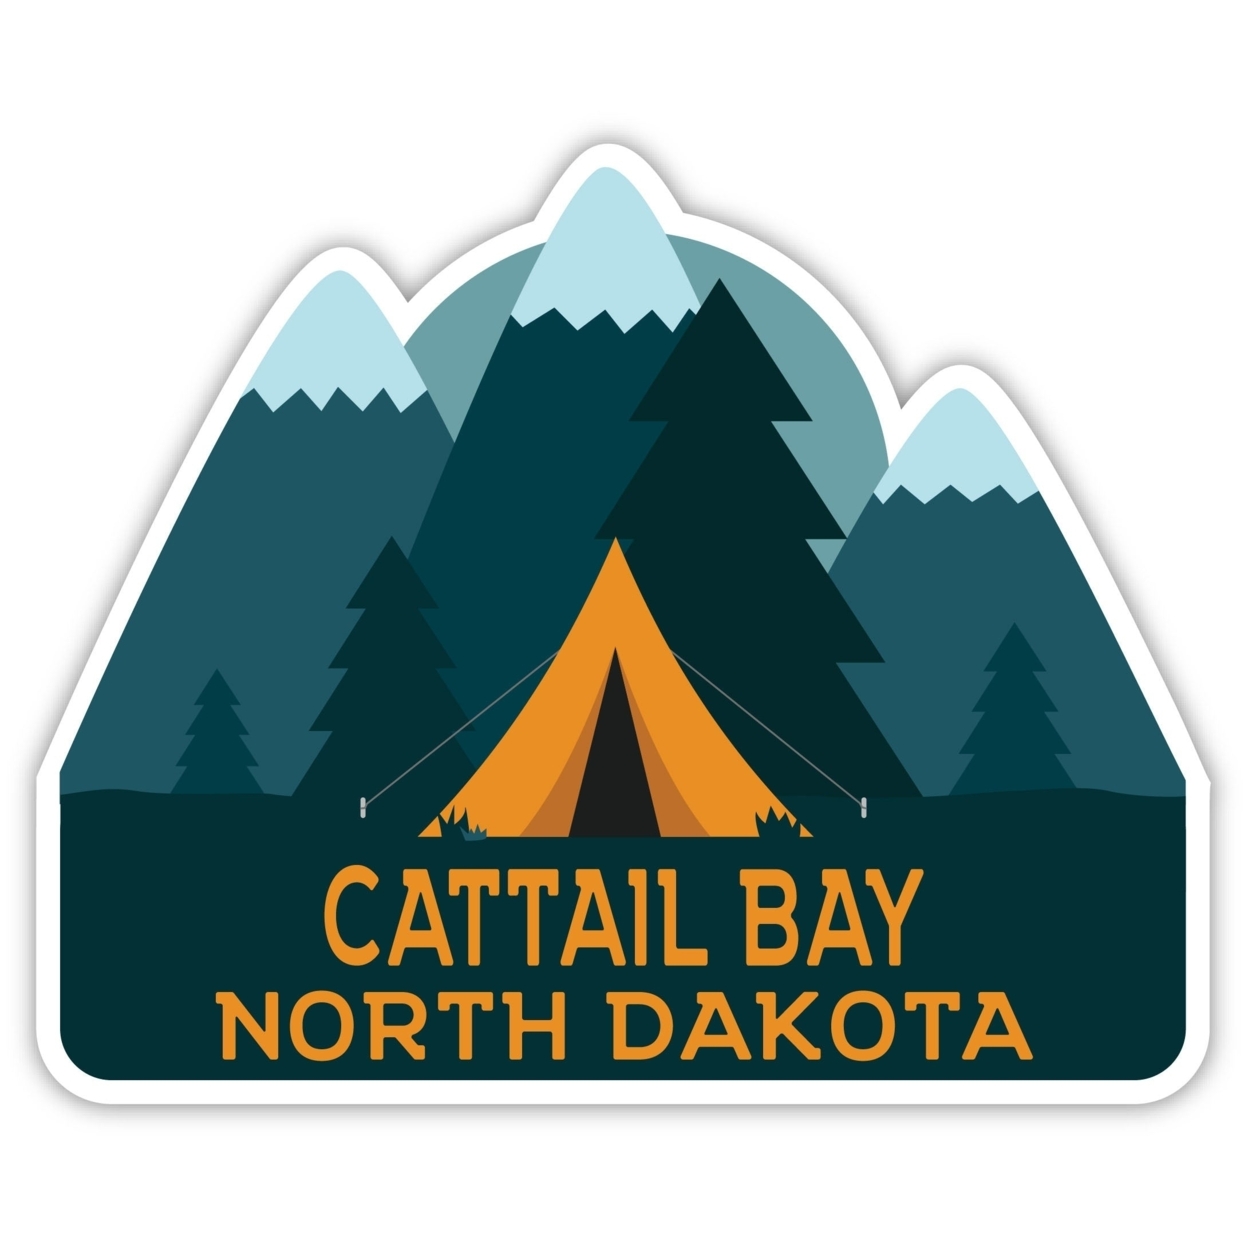 Cattail Bay North Dakota Souvenir Decorative Stickers (Choose Theme And Size) - 4-Pack, 12-Inch, Tent